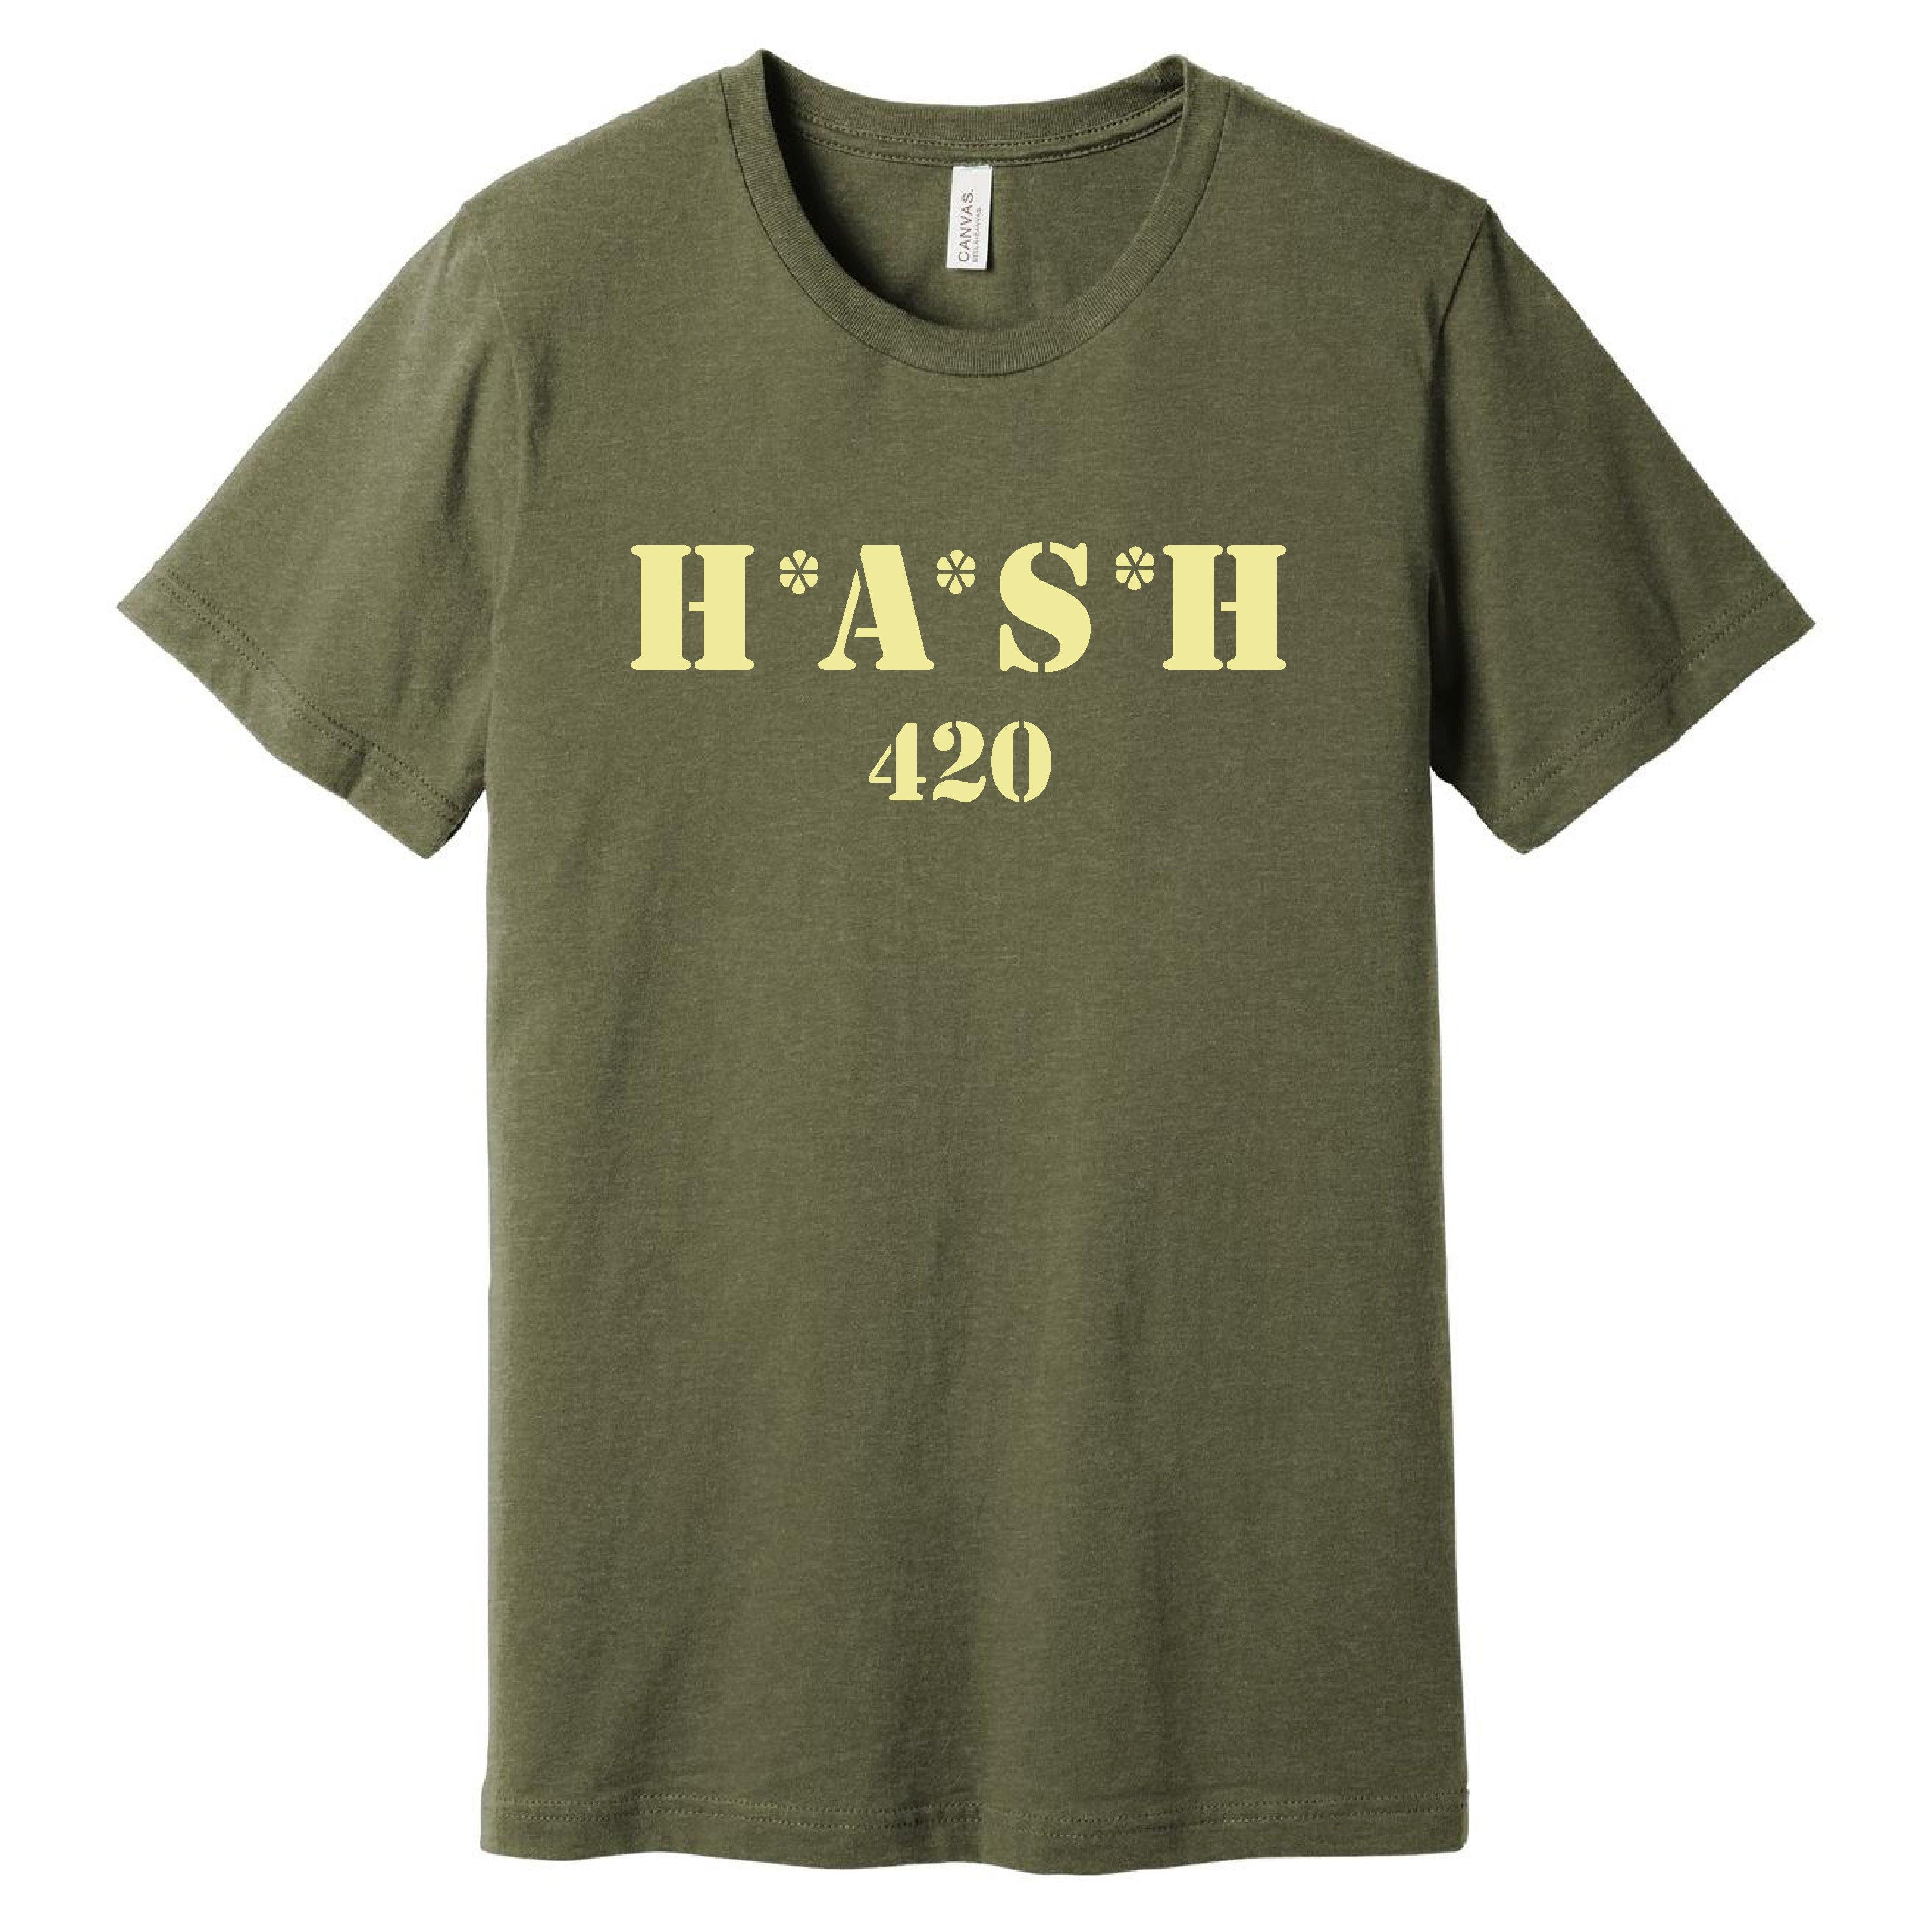 Hash 420 T-Shirt - Ales to Trails